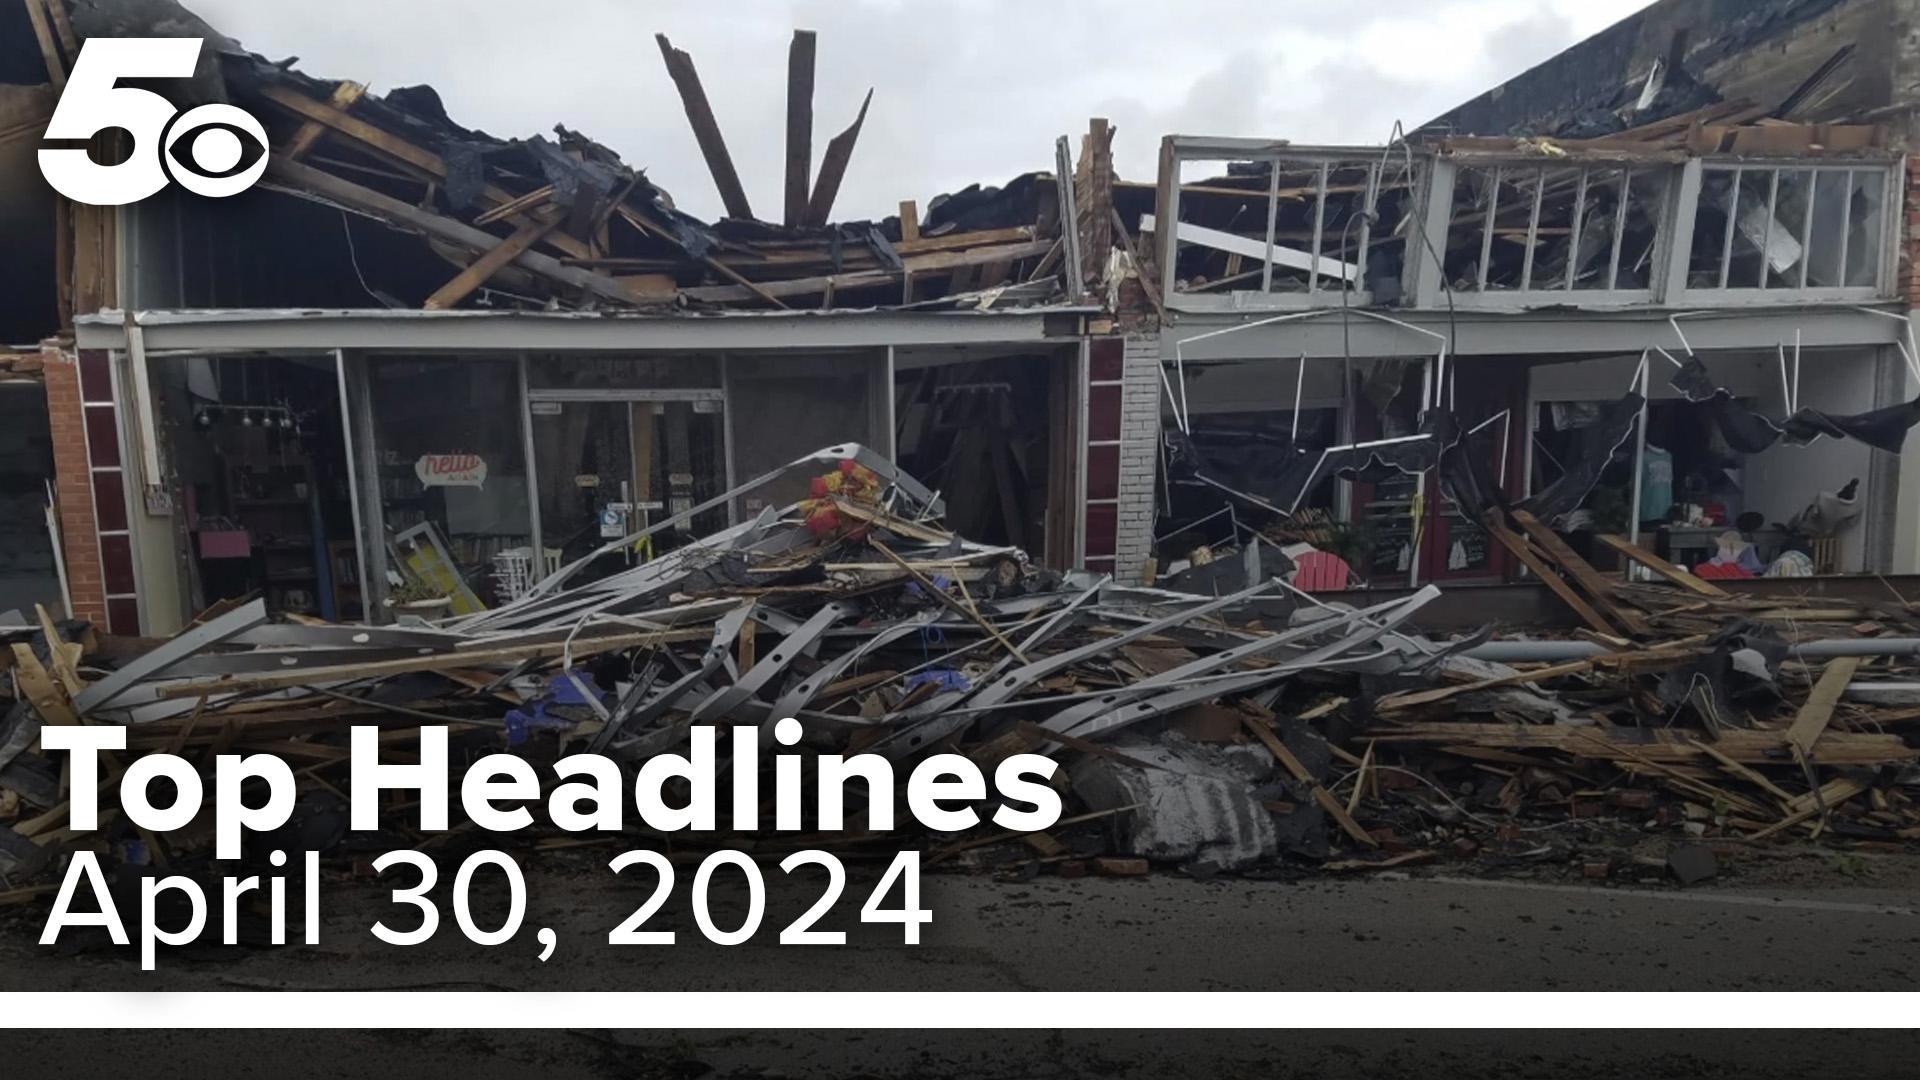 Find out how a local nonprofit is helping out areas of Oklahoma after deadly tornadoes ripped through the state. This and more on your 5NEWS Top Headlines.